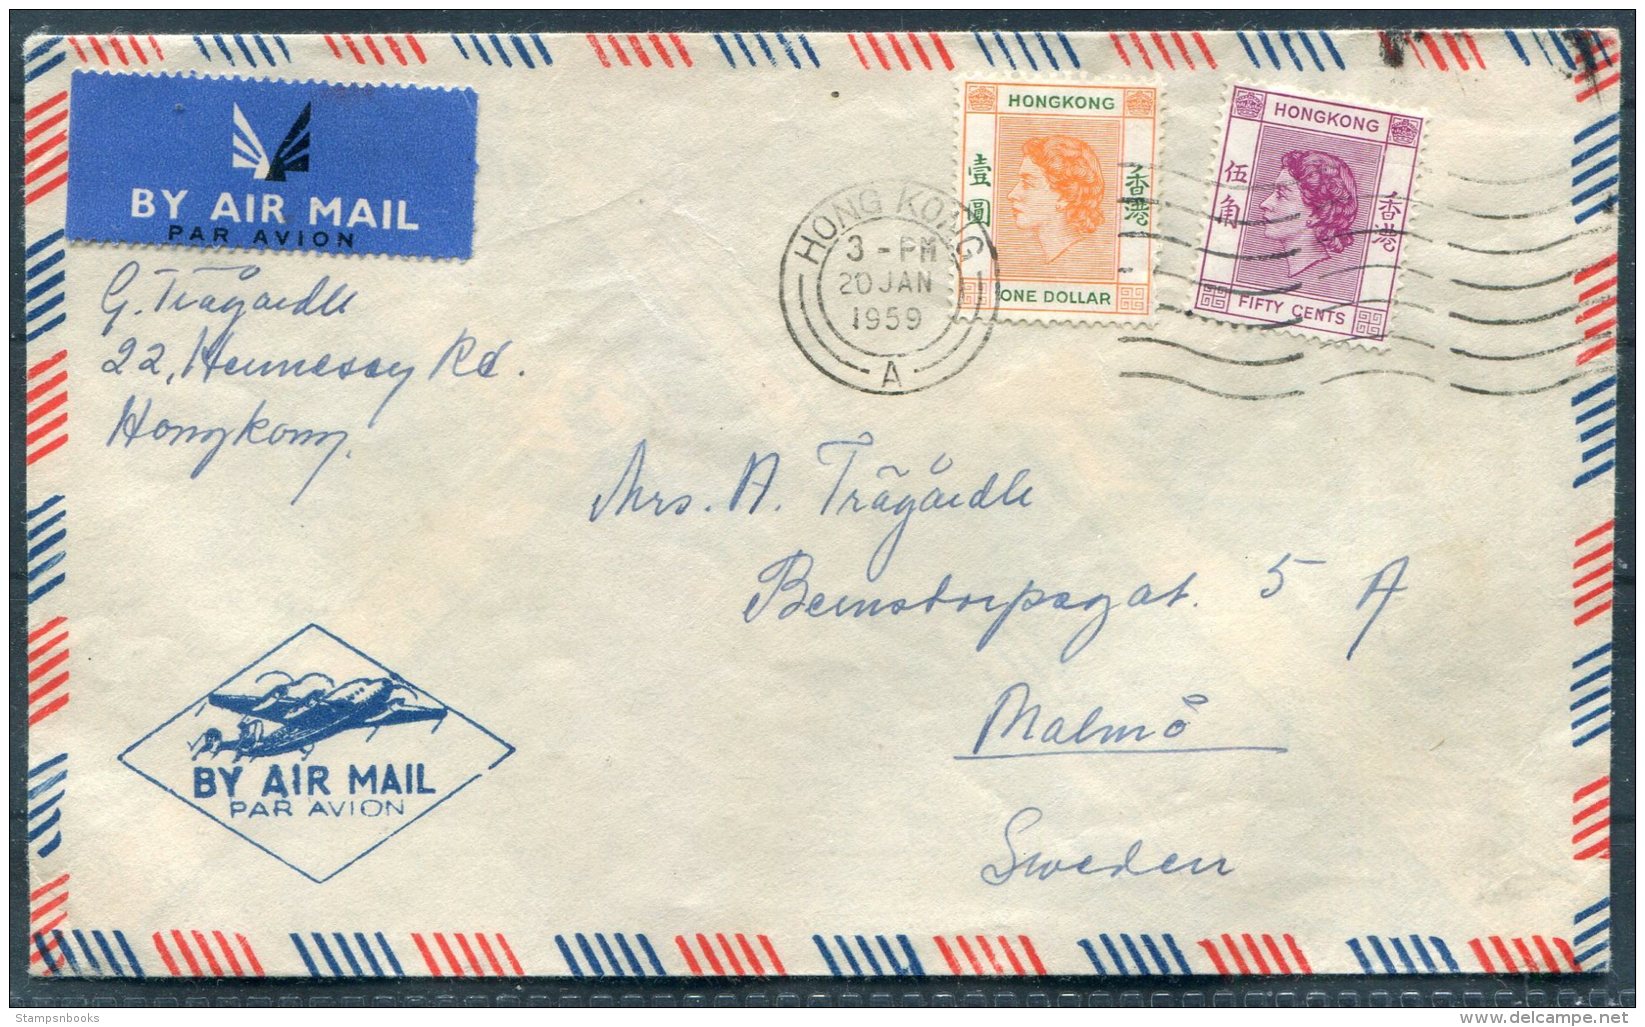 1959 Hong Kong $1.50 Rate Airmail Cover - Malmo, Sweden - Covers & Documents